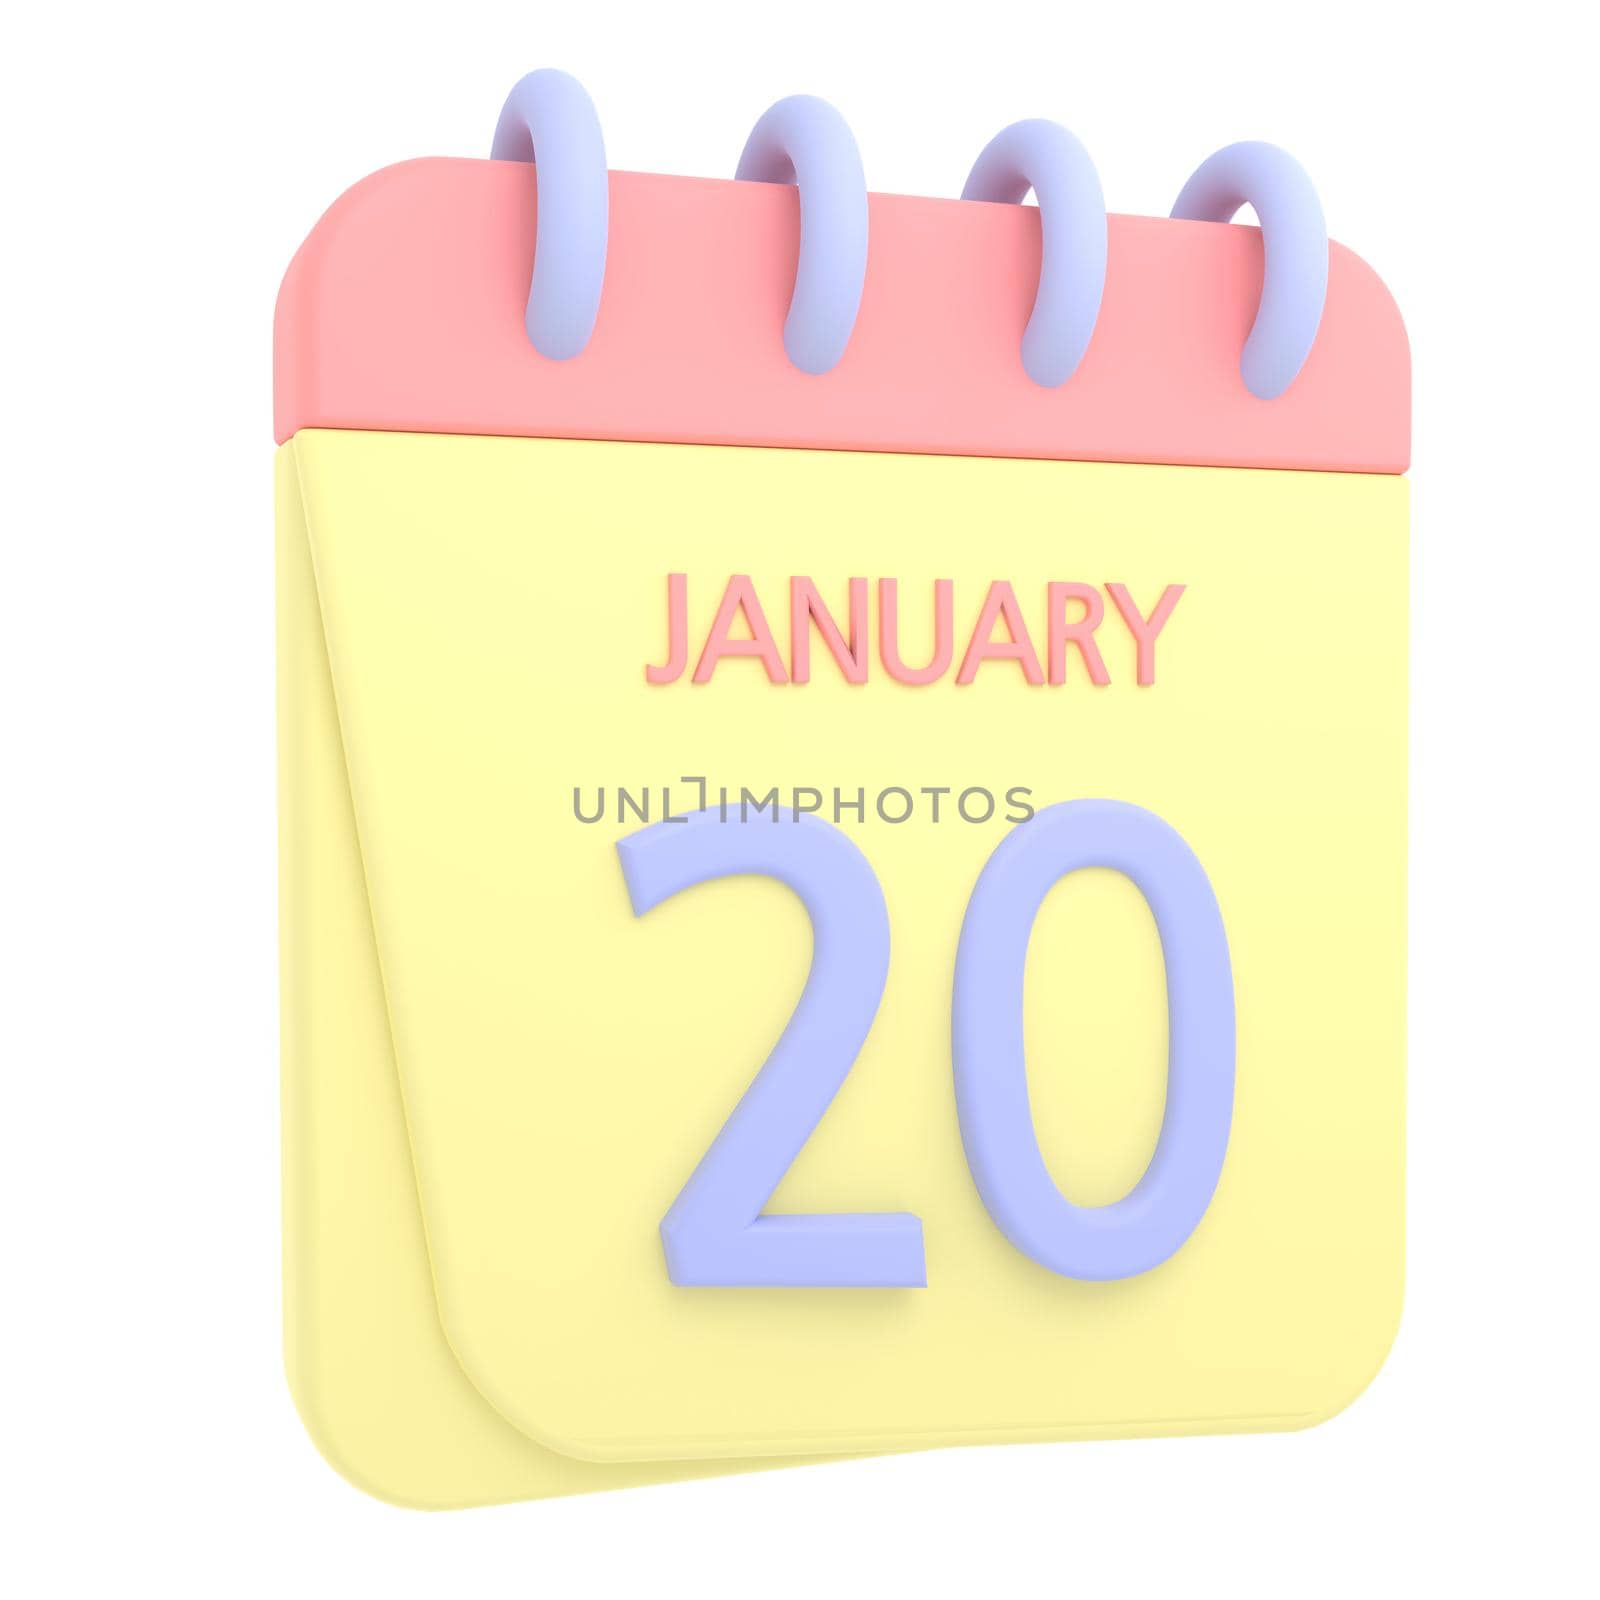 20th January 3D calendar icon. Web style. High resolution image. White background